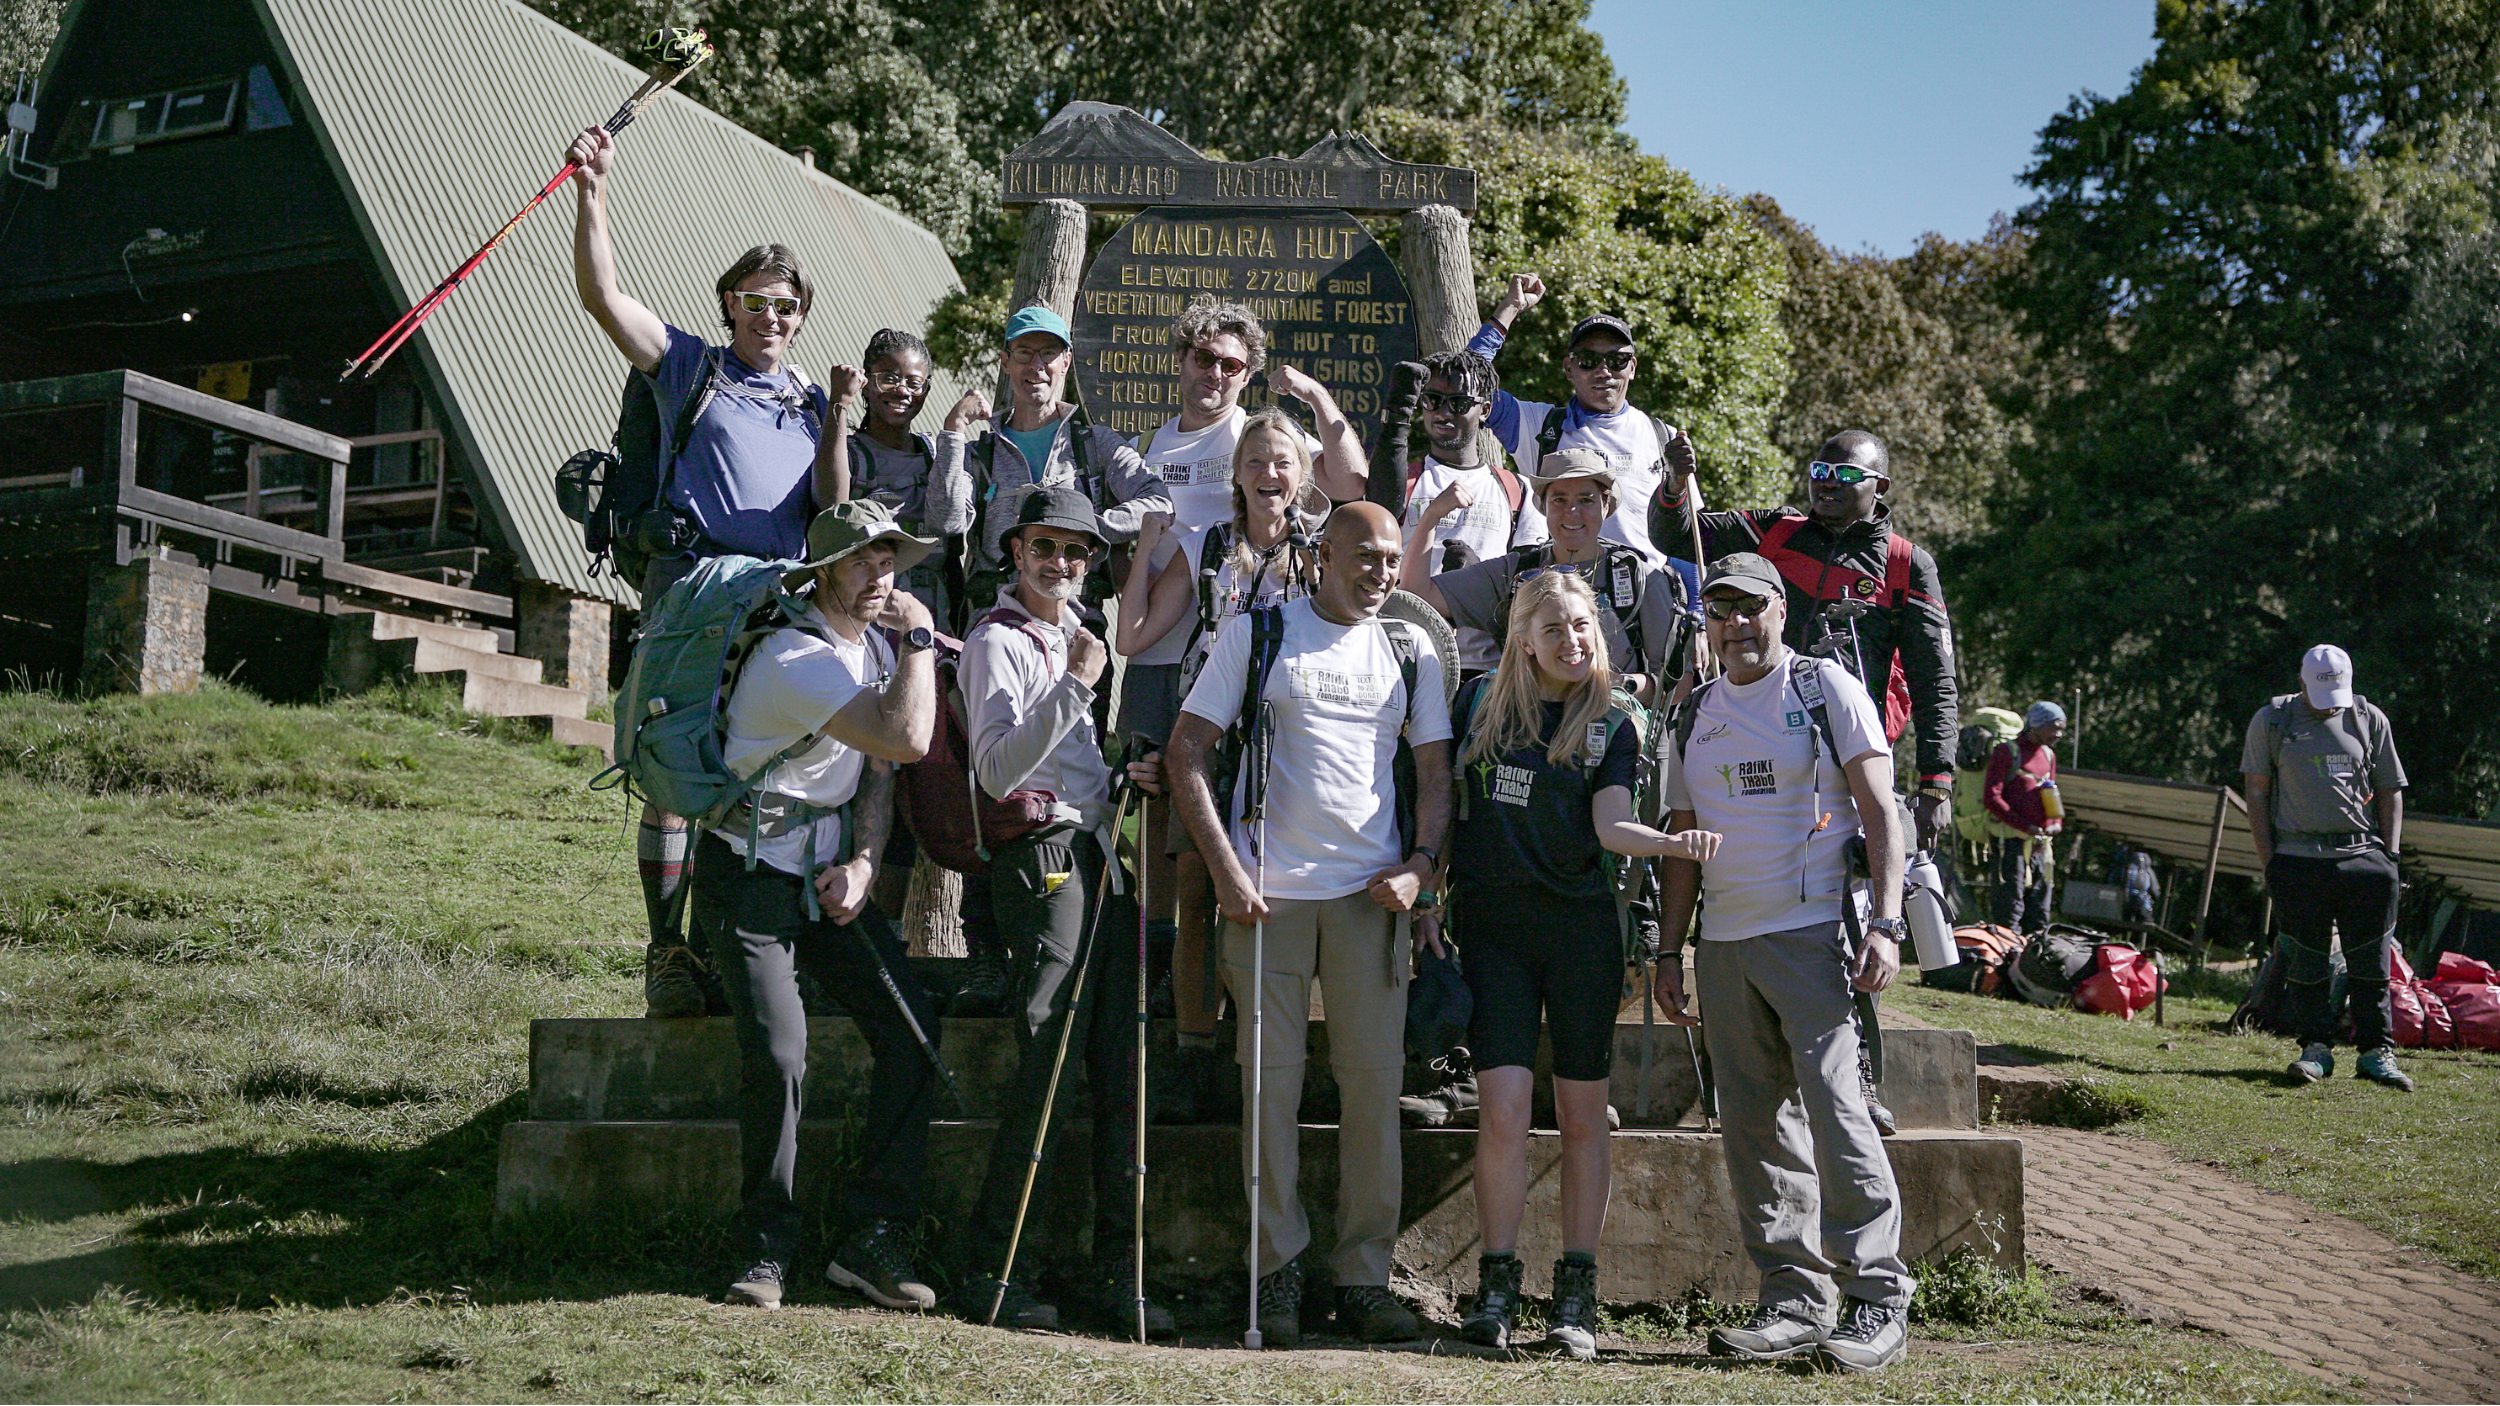 An image of the trekkers triumphant after their summit.